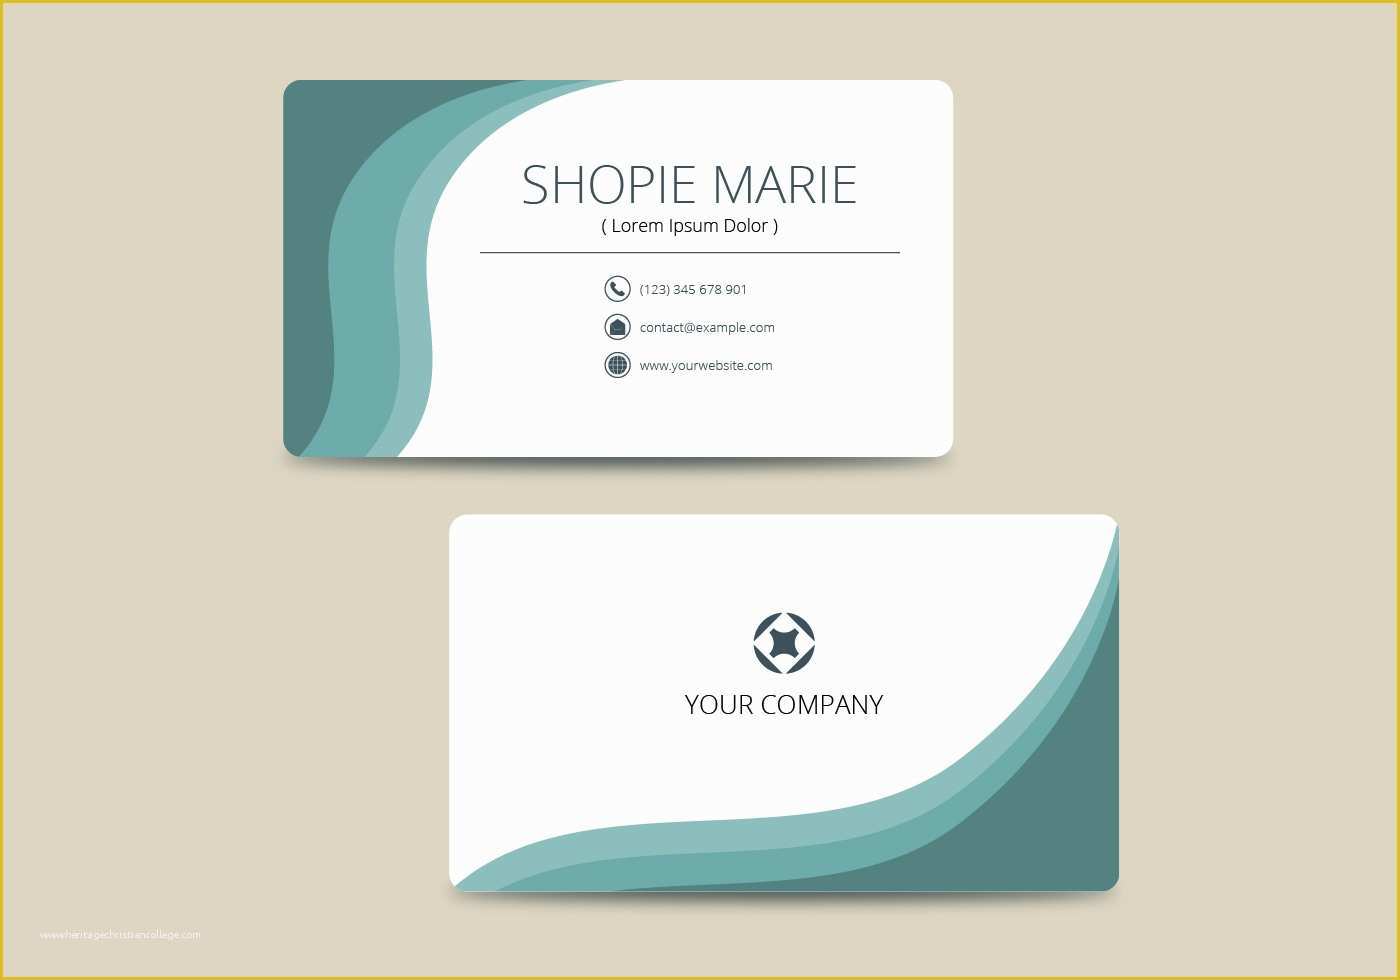 Business Calling Card Template Free Of Business Card Template Free Vector Art Free